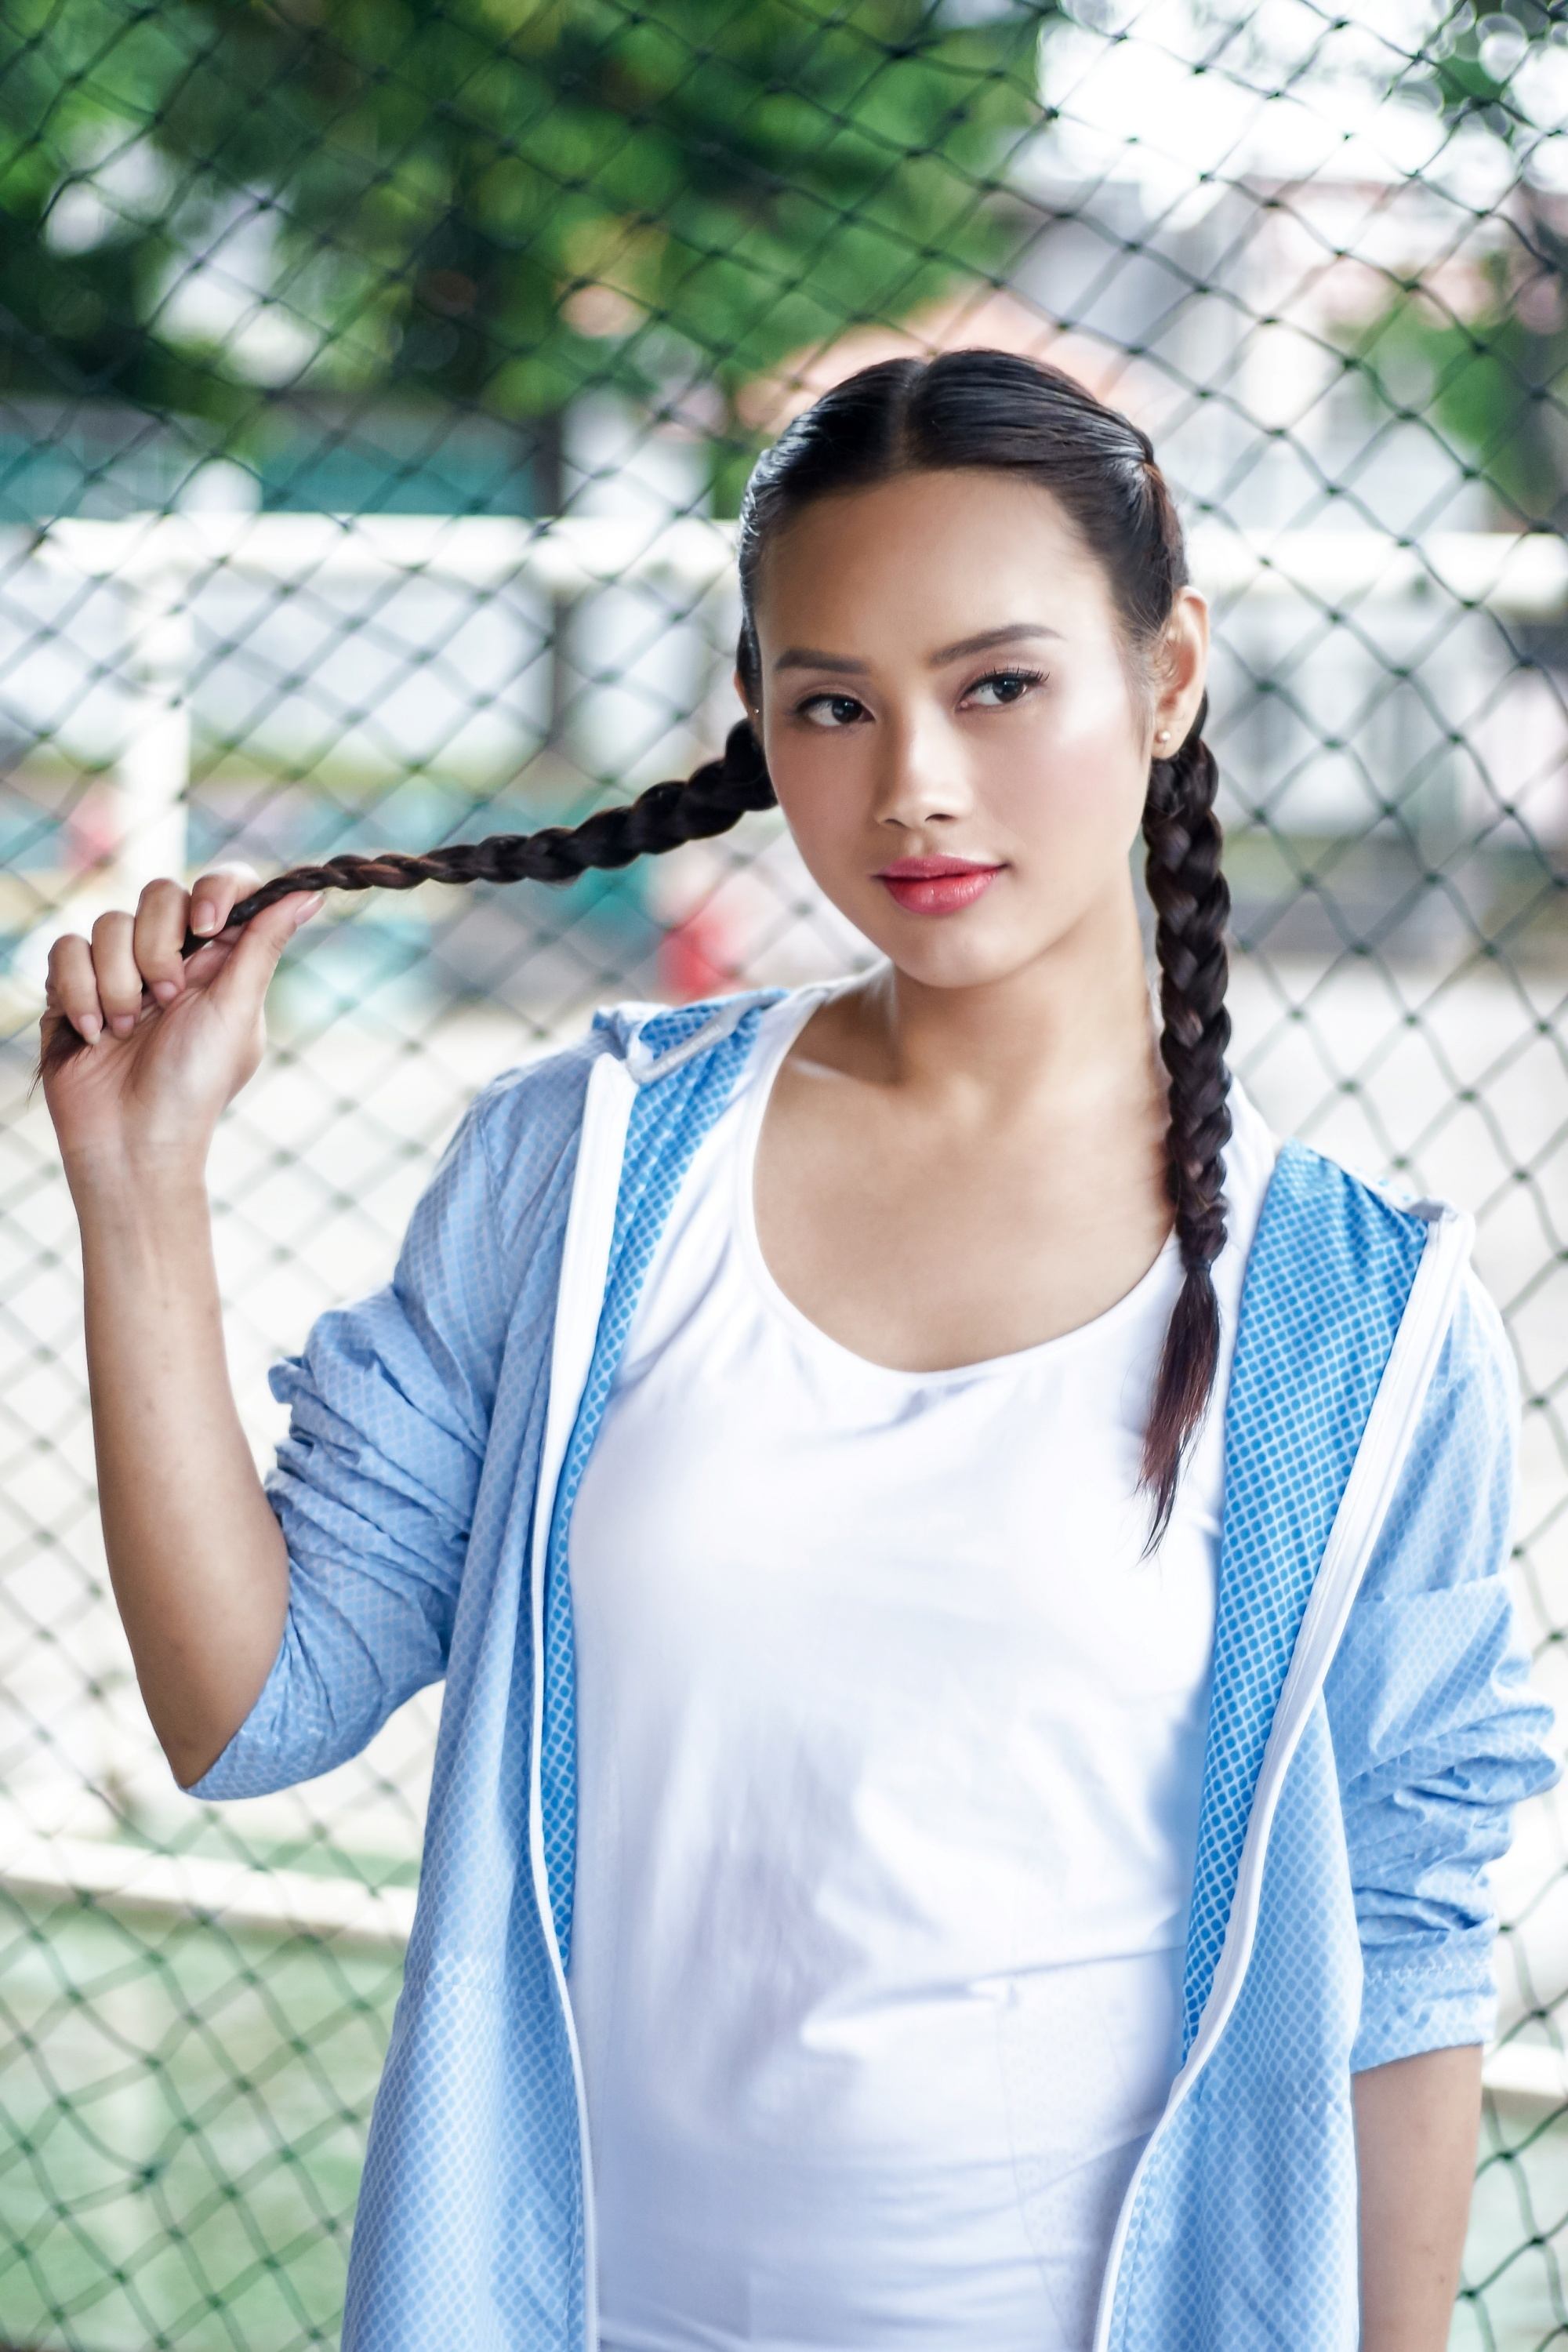 Asian woman with a round face with hair in boxer braid wearing a sporty attire outdoors